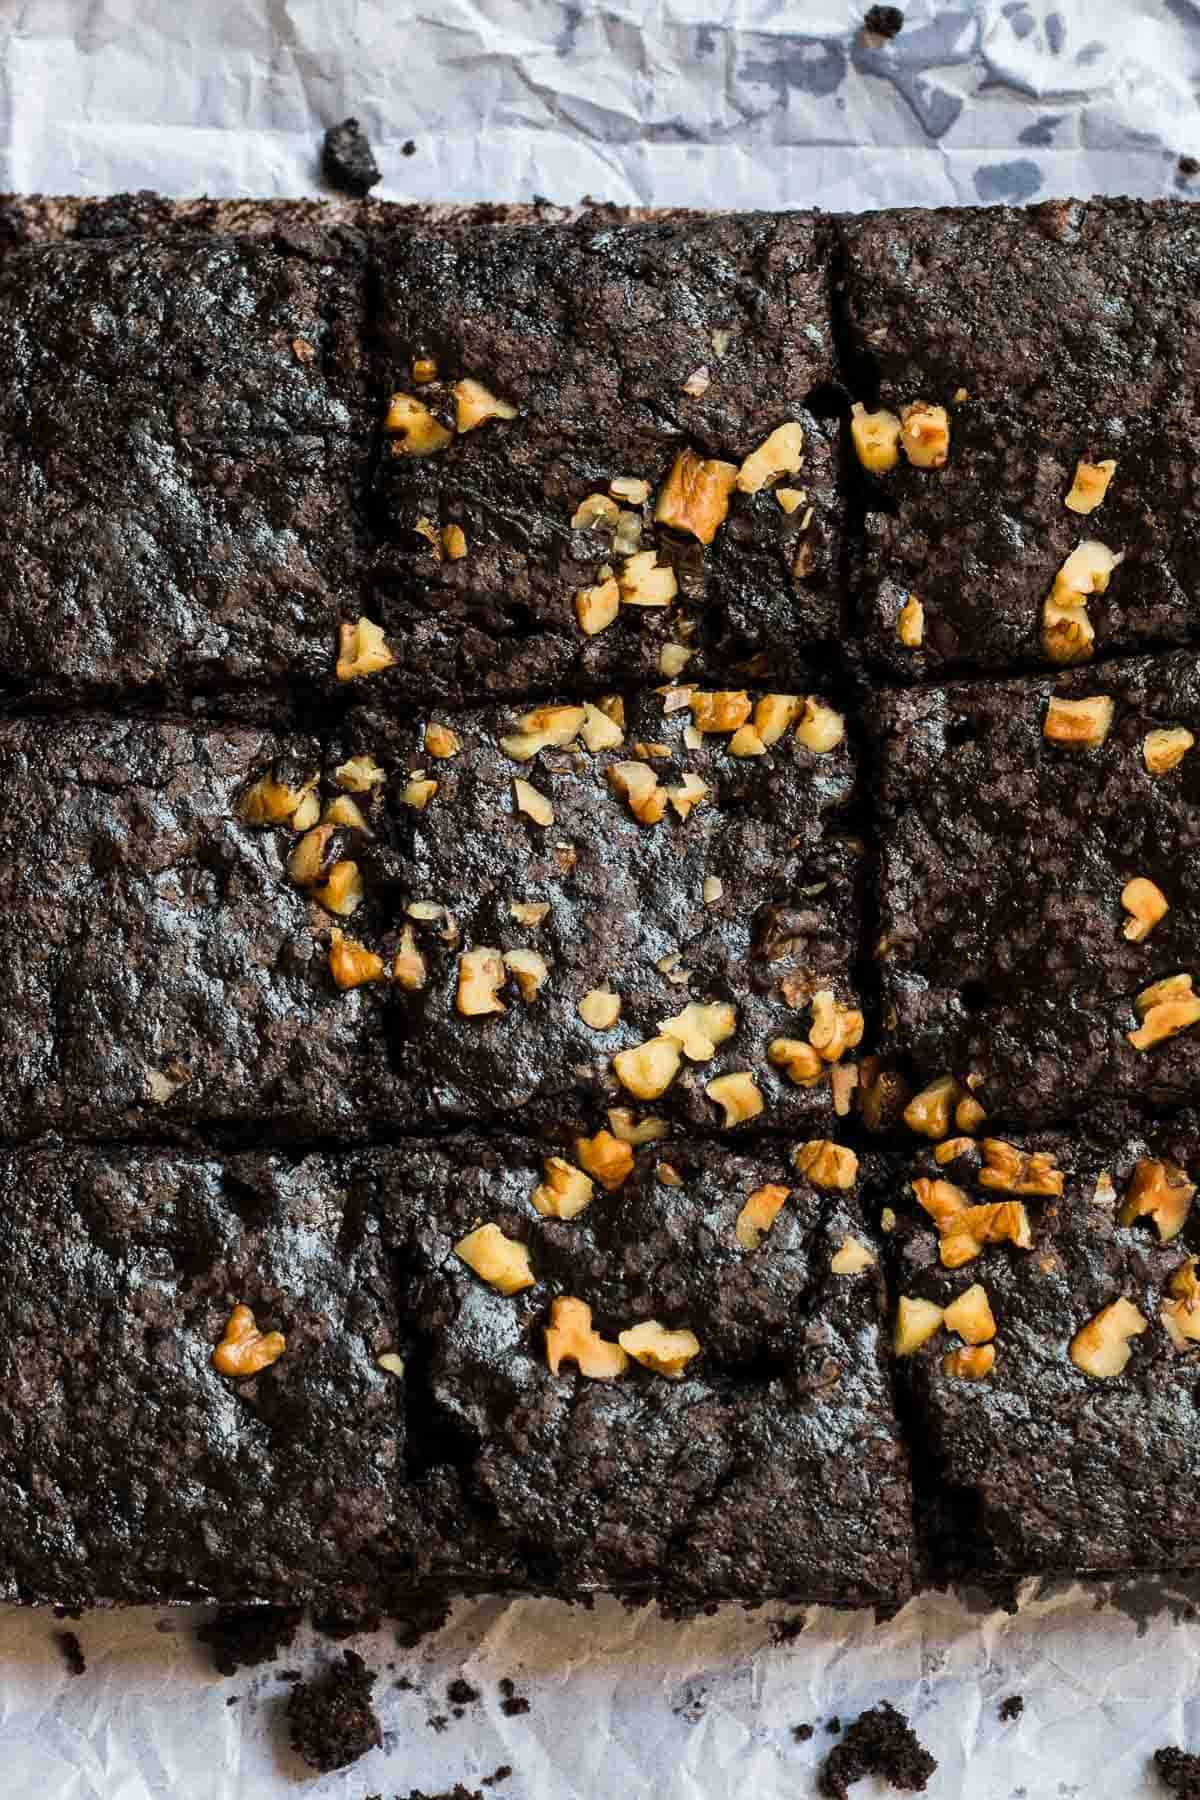 Eggless brownies - fresh out of the oven!